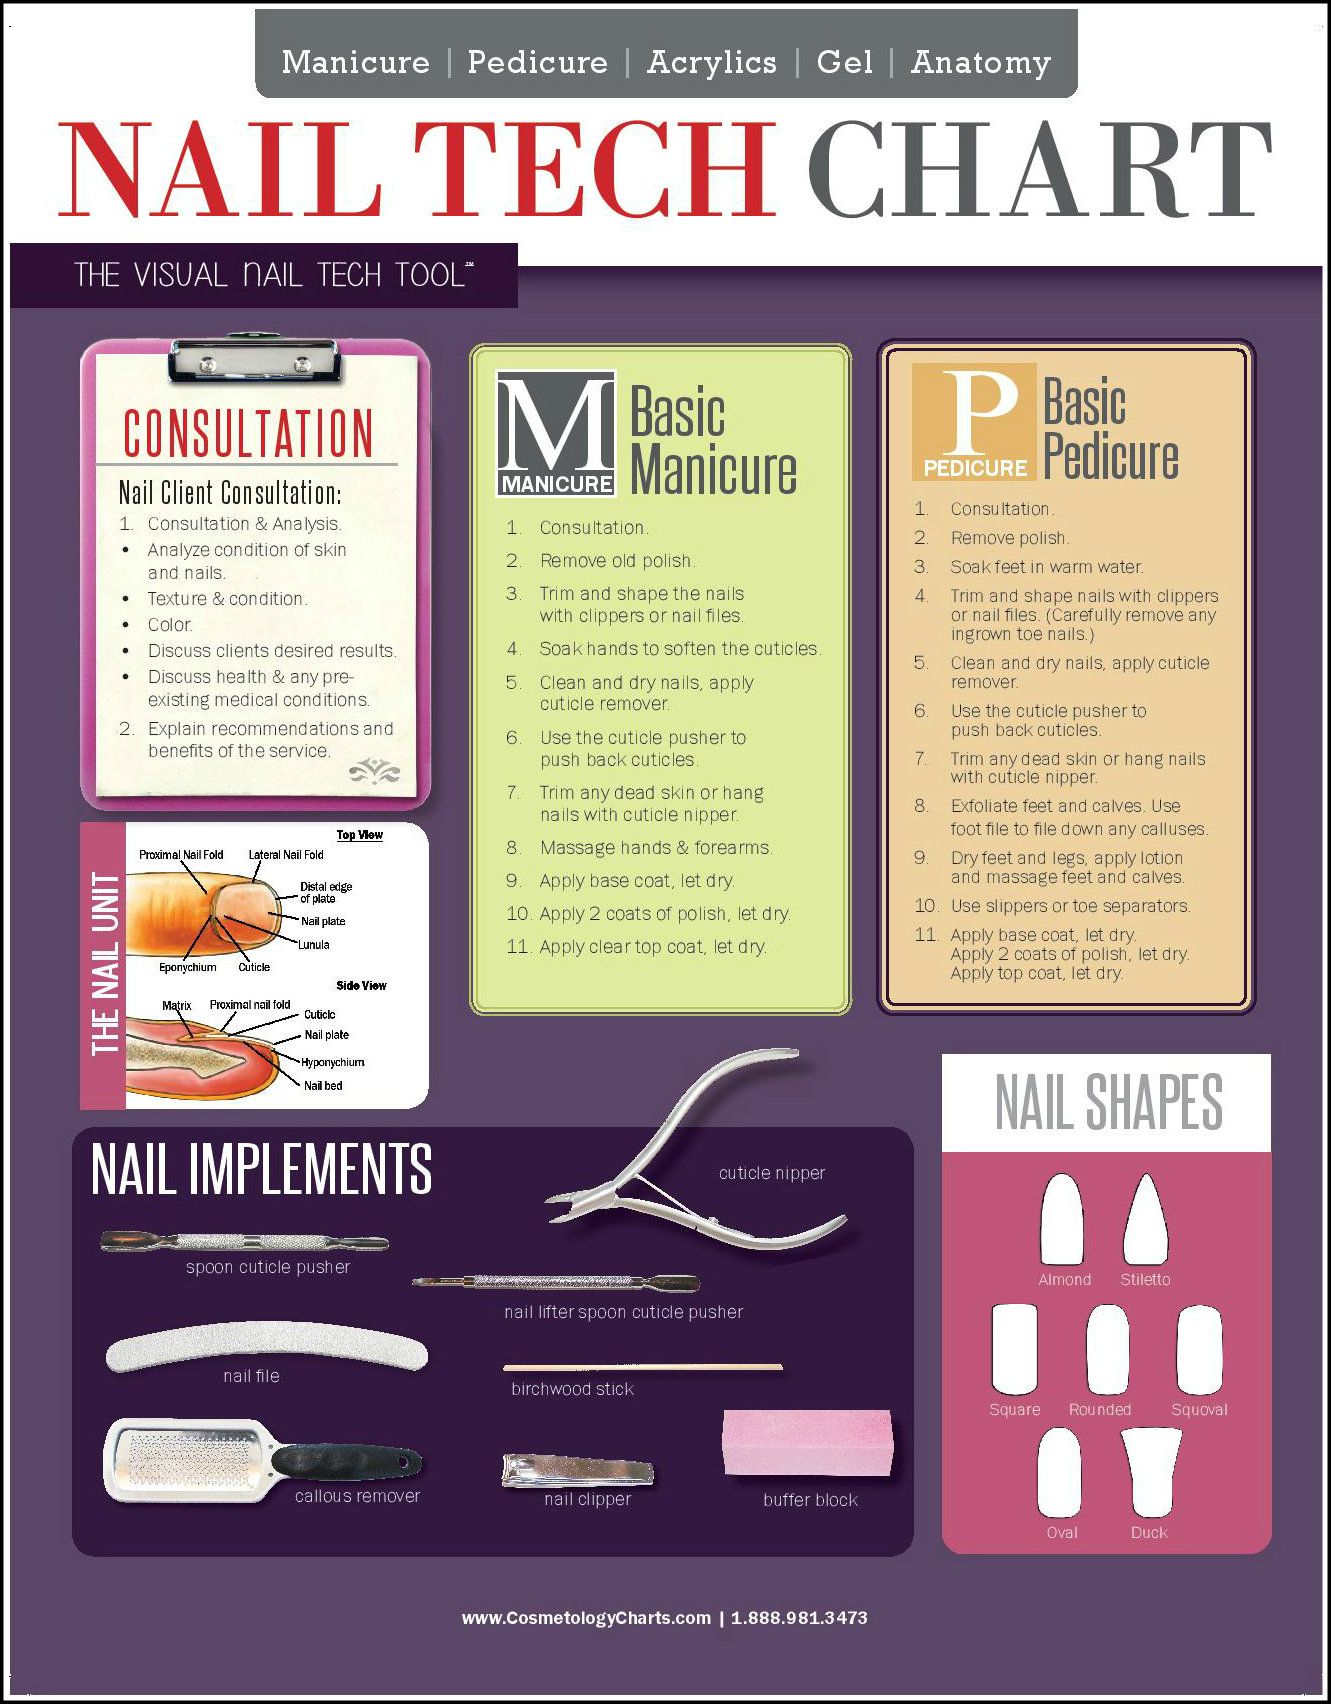 Nail technician cheat sheet image on how to become a nail technician page